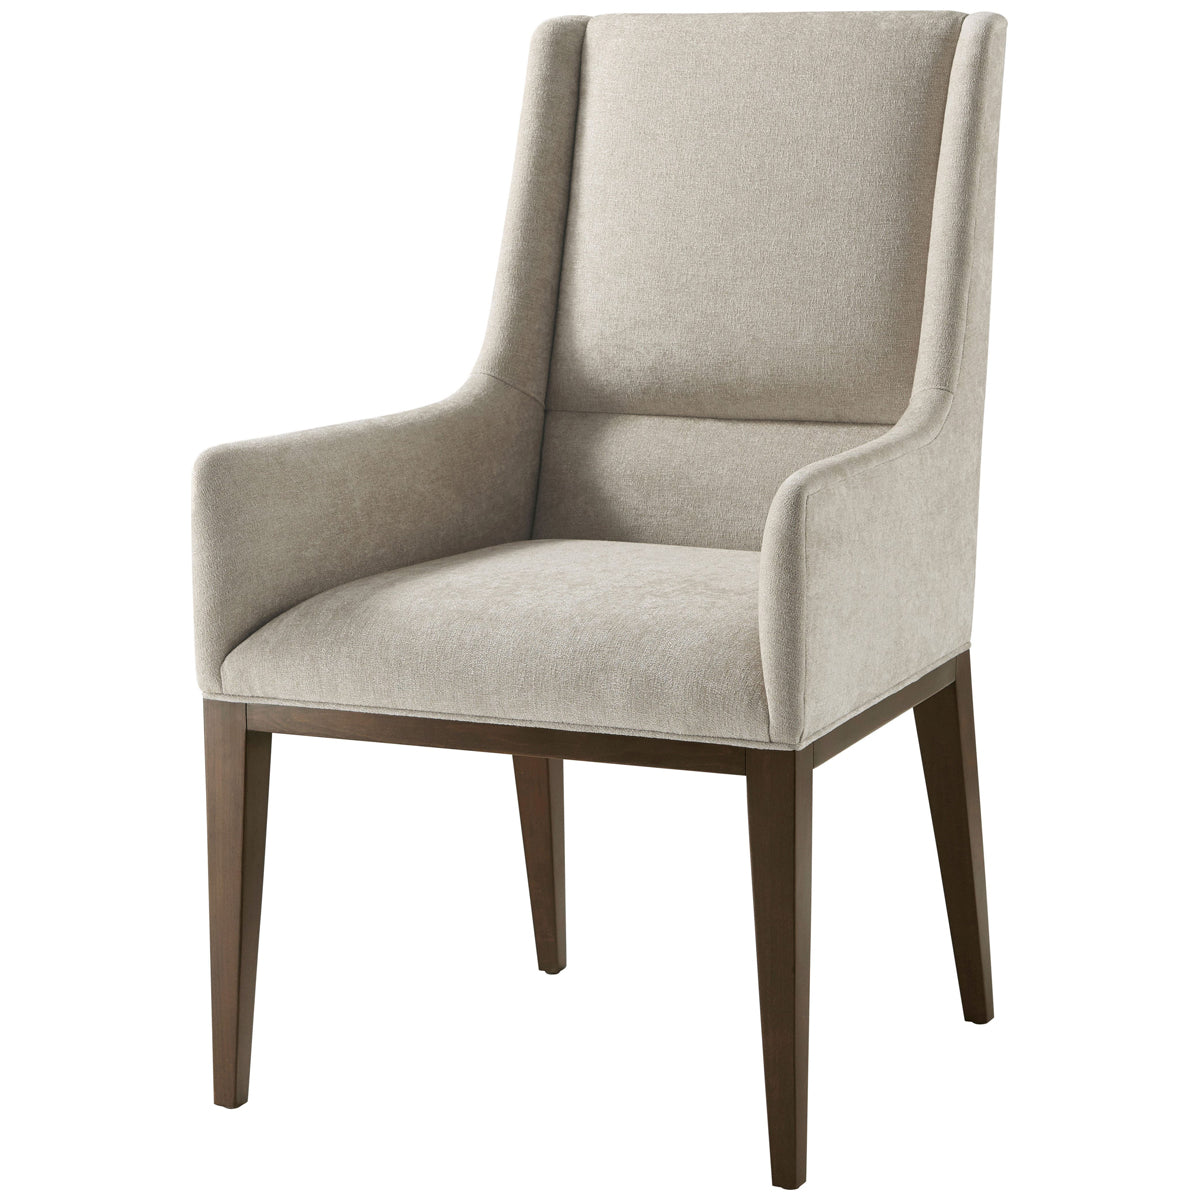 Theodore Alexander Lido Upholstered Dining Arm Chair, Set of 2